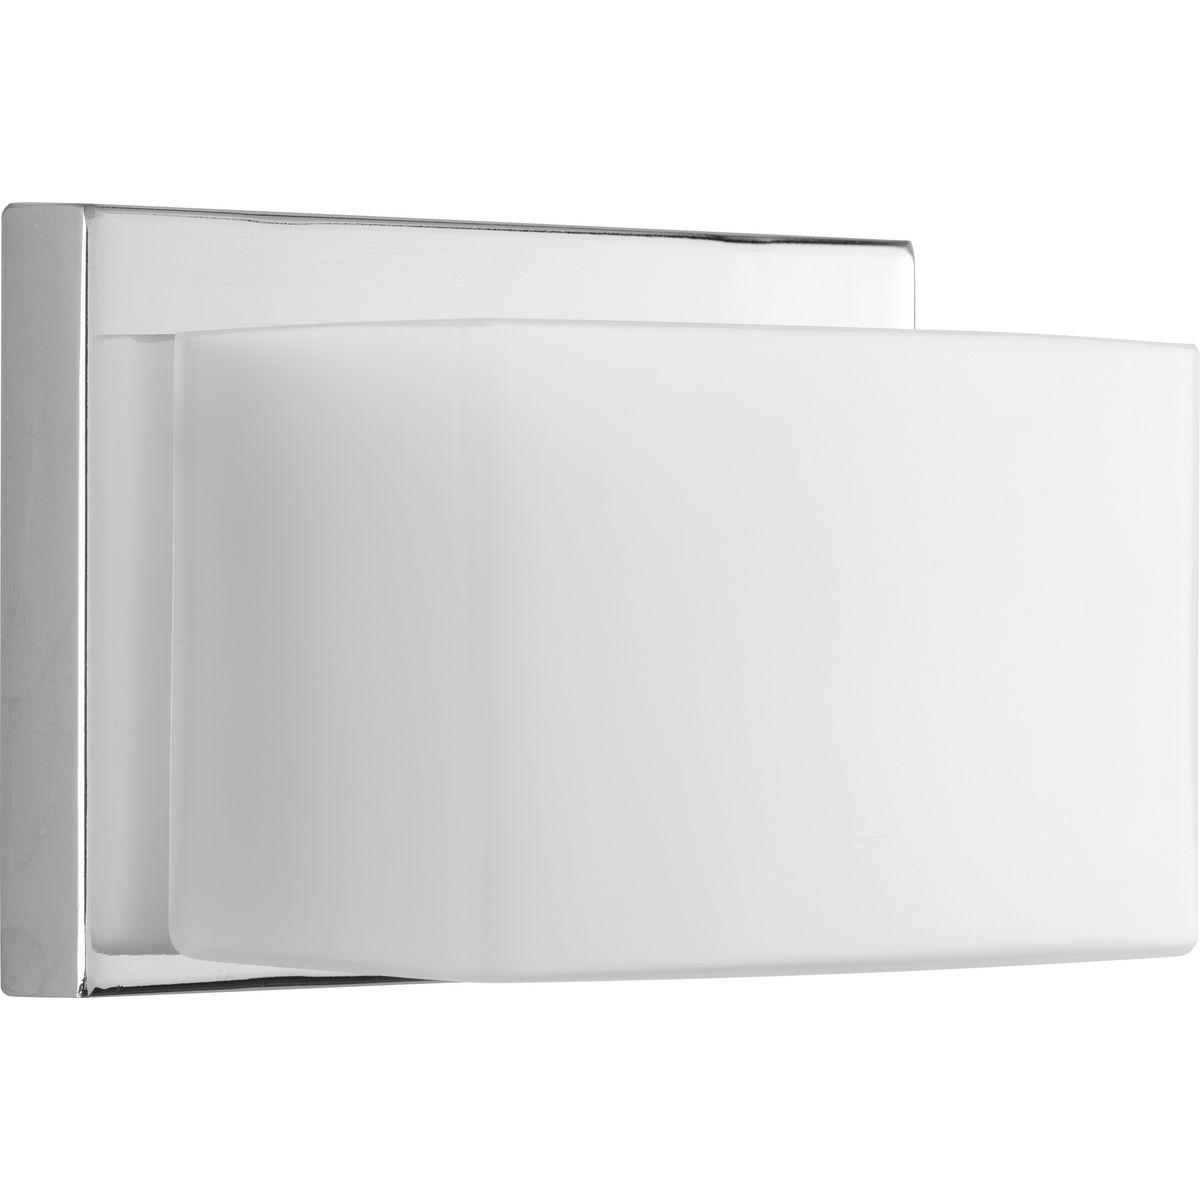 Hubbell P2142-1530K9 One-Light LED modern wall fixture in Polished Chrome with geometric frosted glass shades that provides evenly diffused light. This modern sconce is perfect for the bath or hallway. 3000K color temperature and 90 plus CRI.  ; Ideal for a bathroom ; Perfect